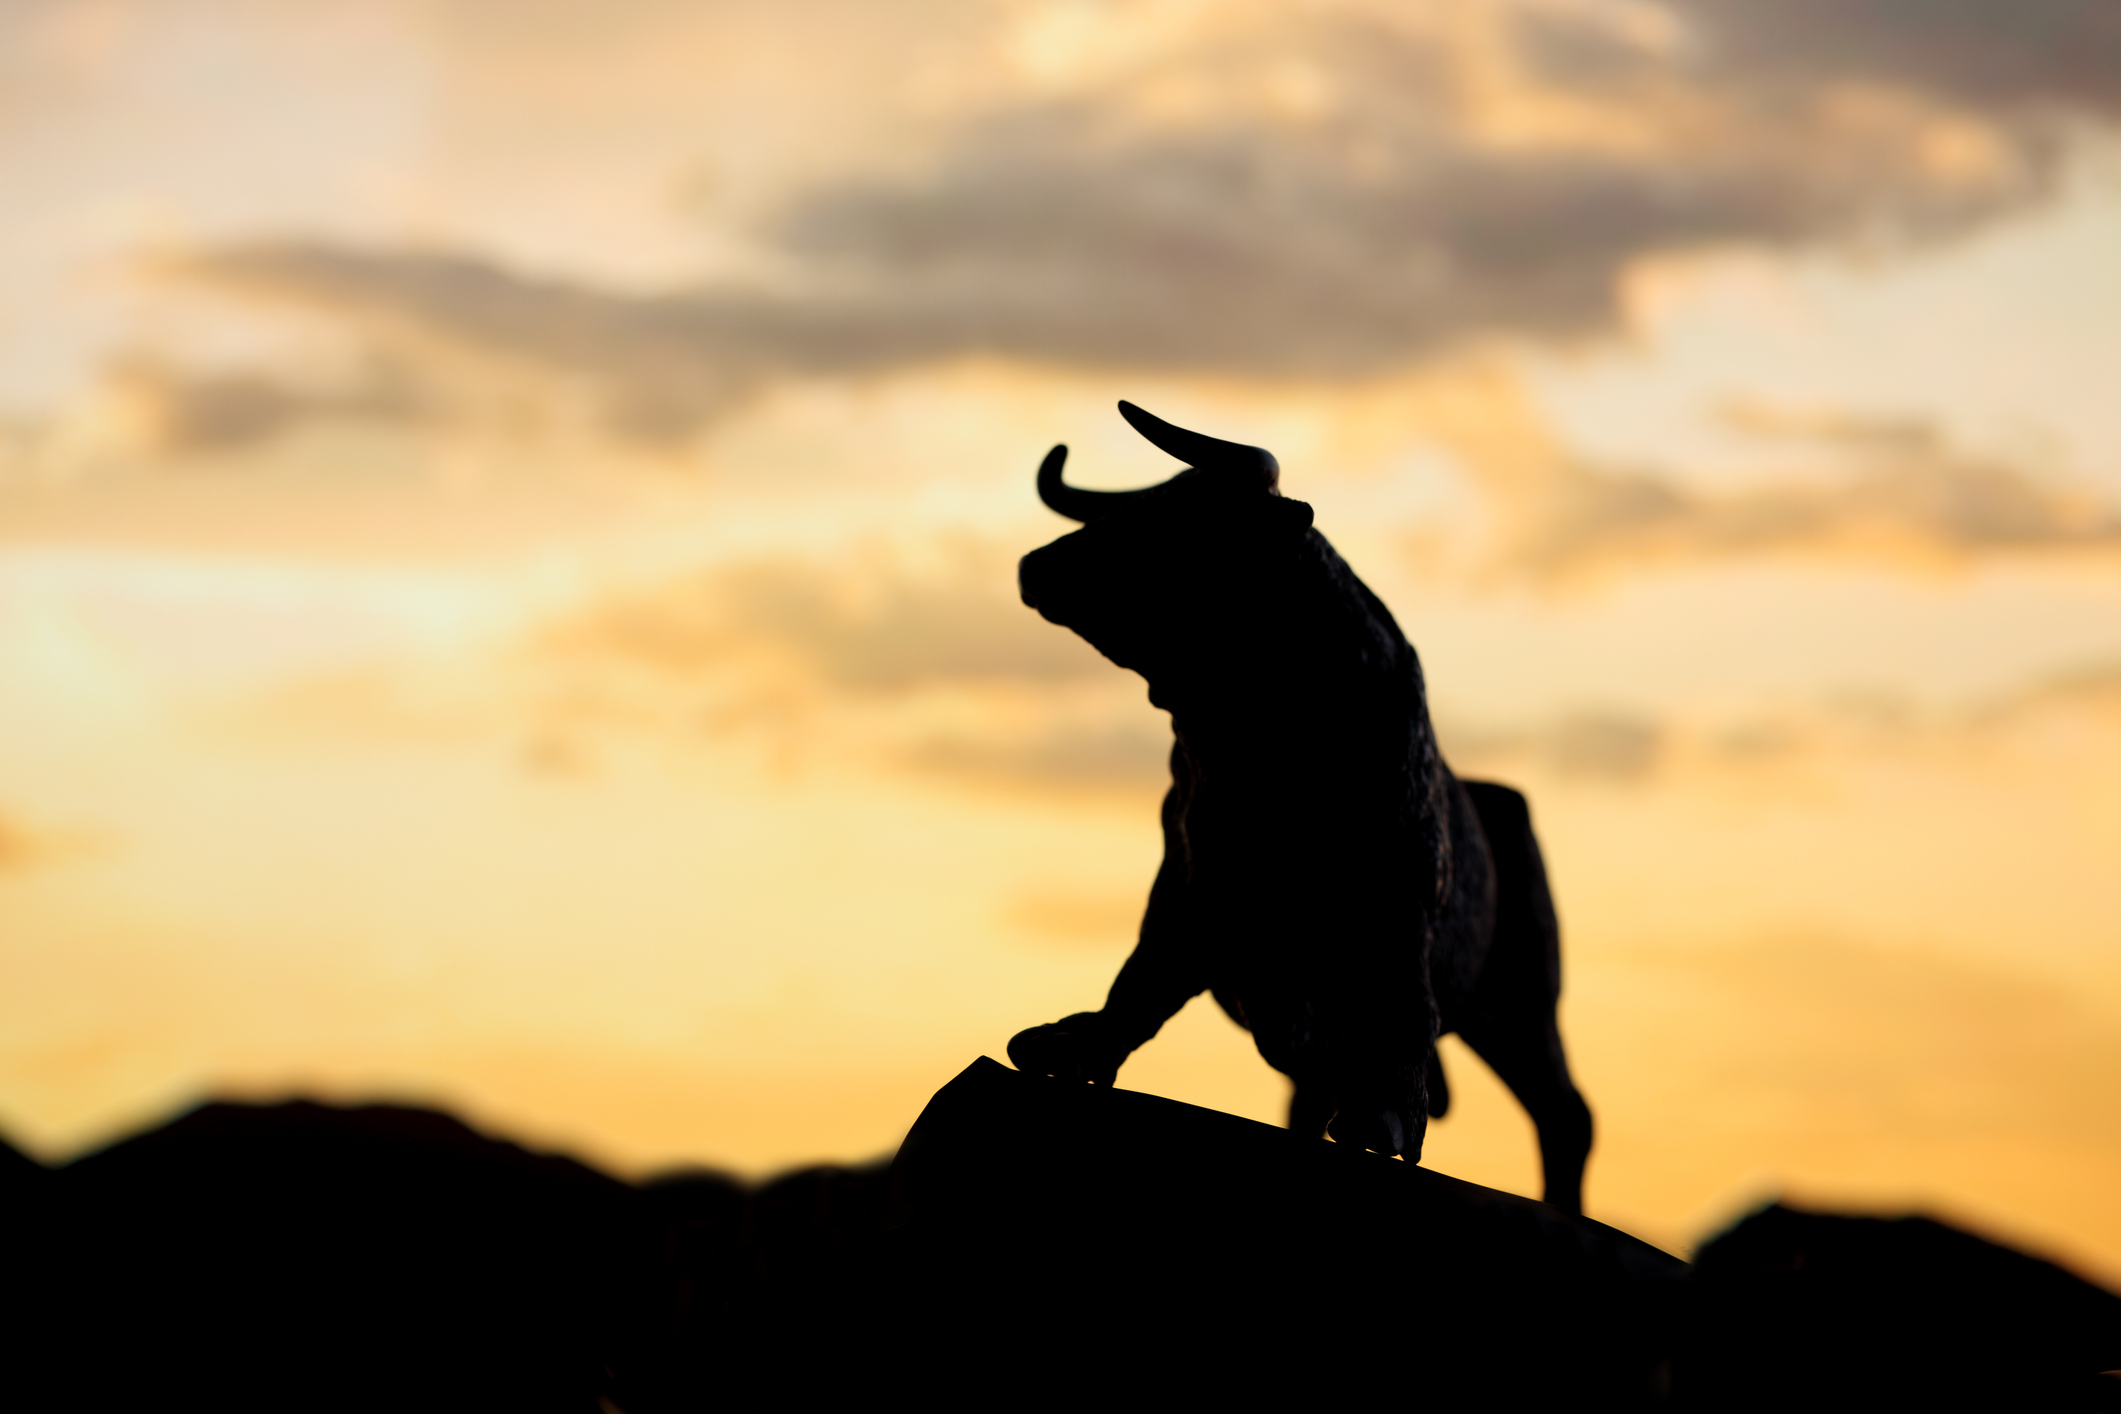 4 reasons to be bullish on Bitcoin in the short and medium term